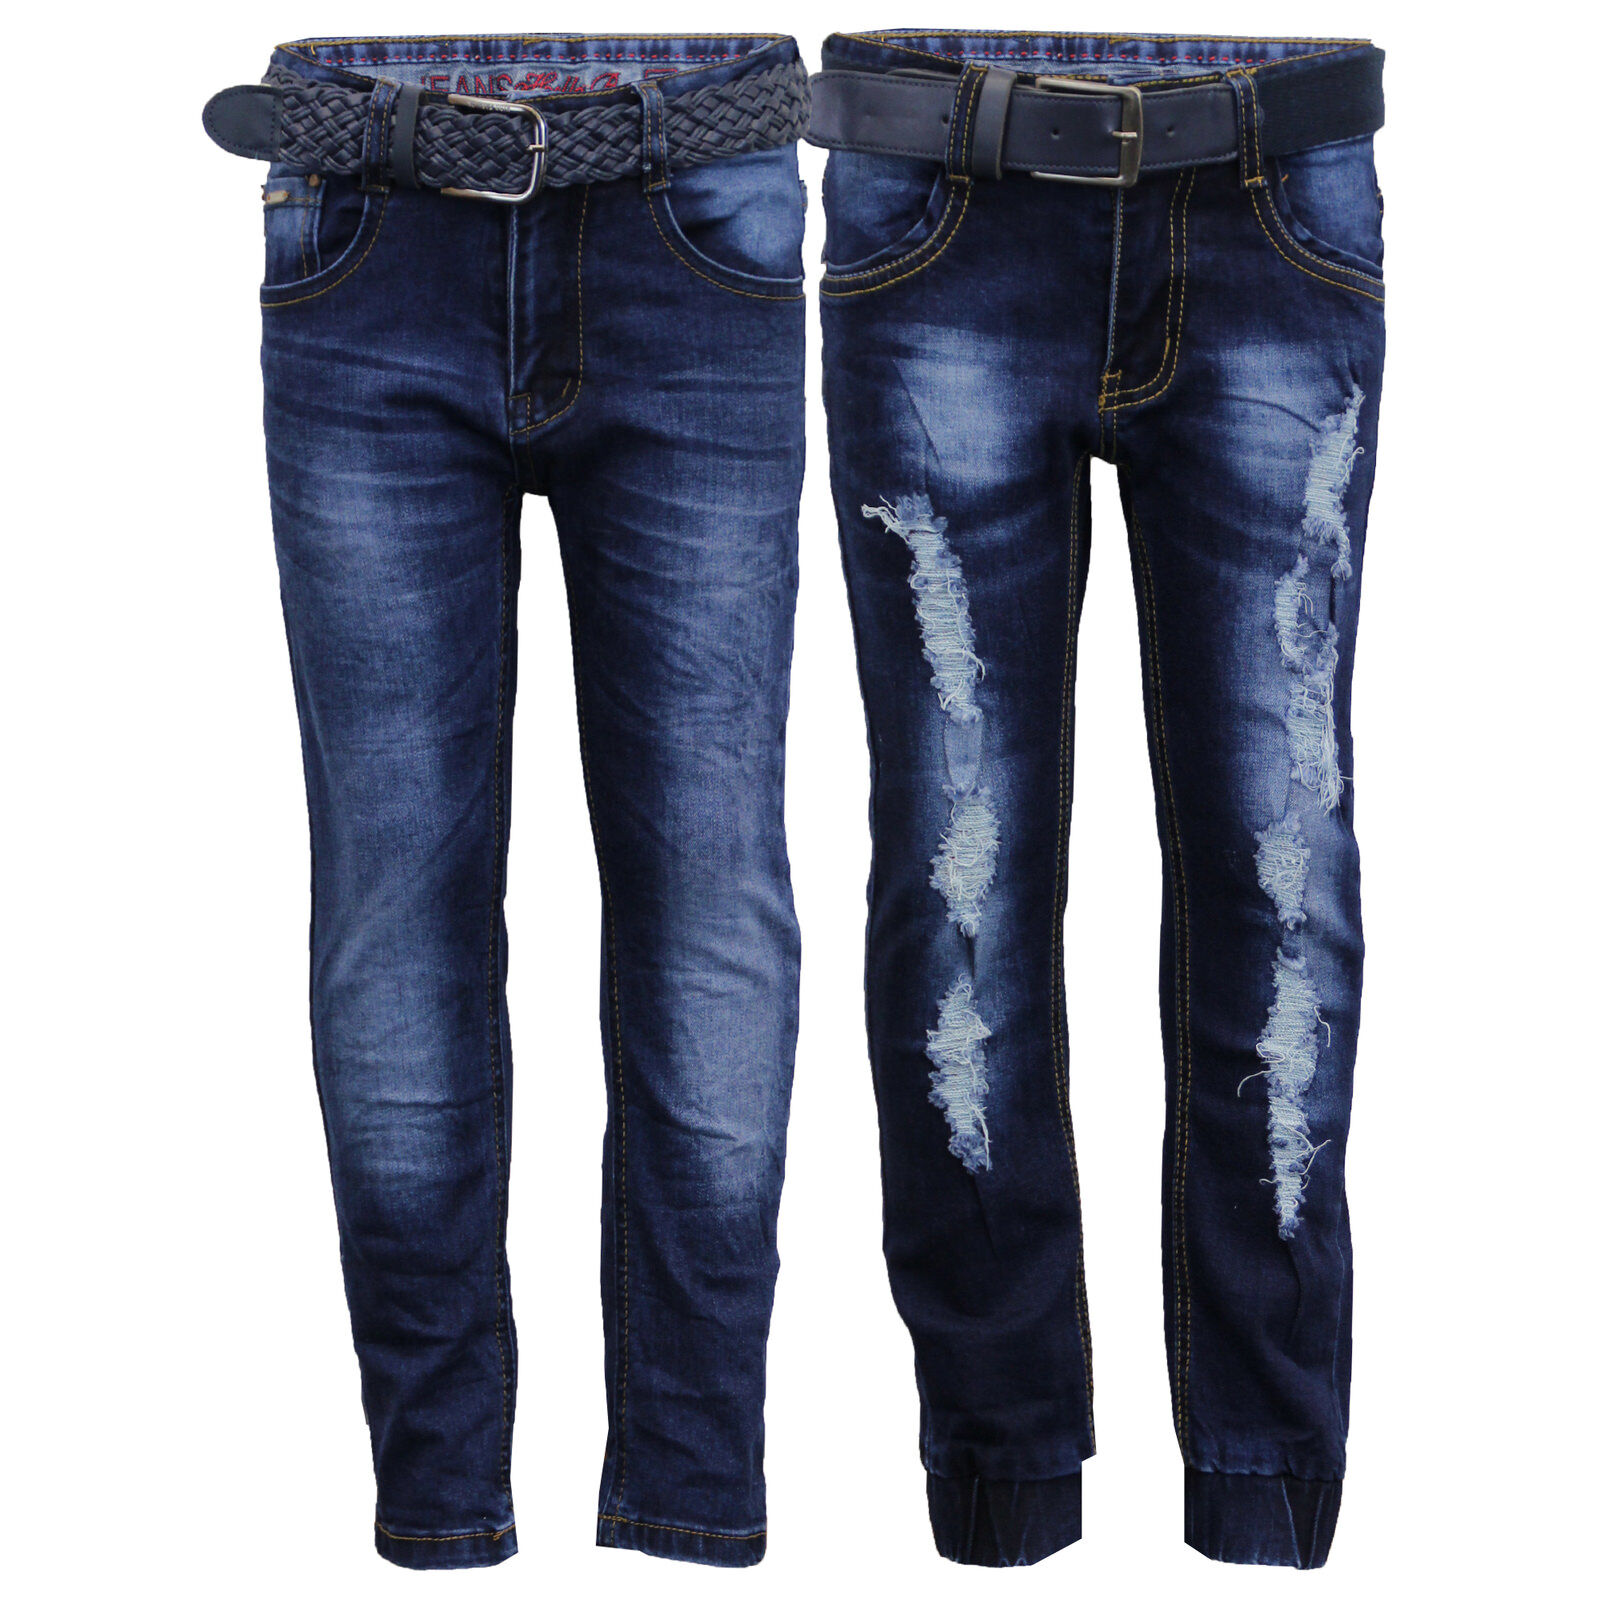 Boys Special price for a limited time Ripped Denim Jeans Kids Pants Fas Trousers Children Special Campaign Bottoms